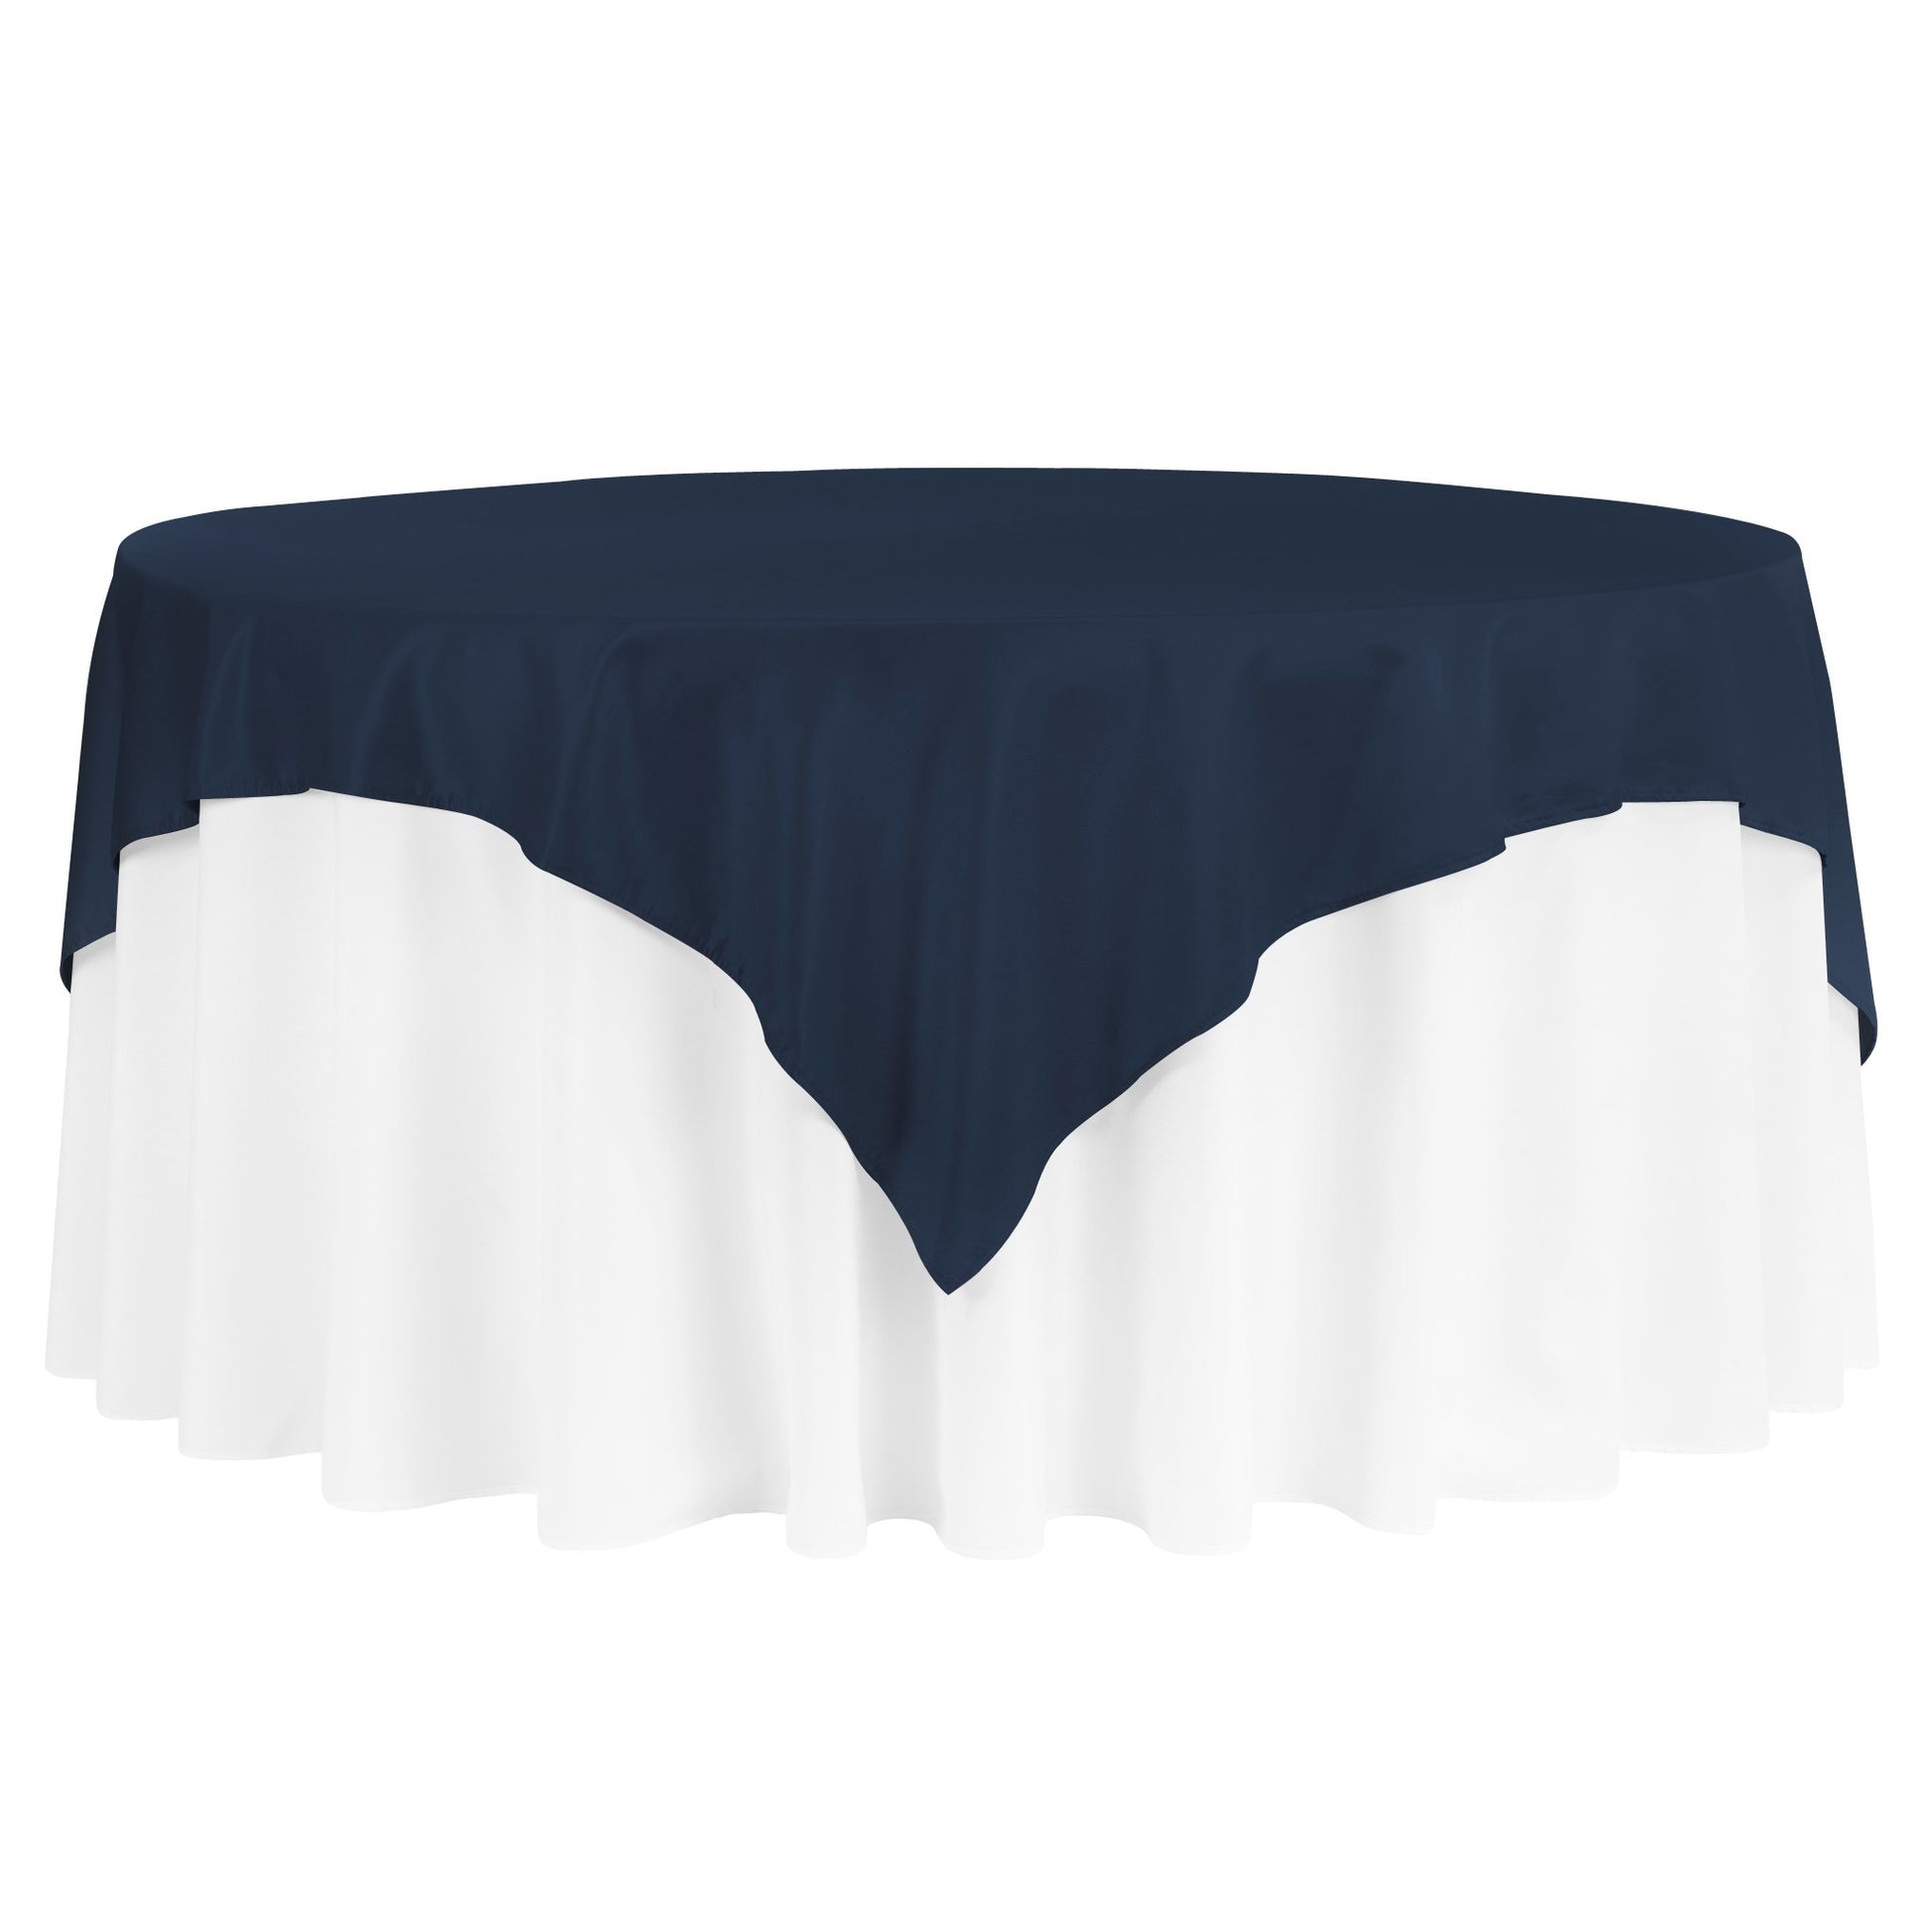 Square 72" Lamour Satin Table Overlay - Navy Blue